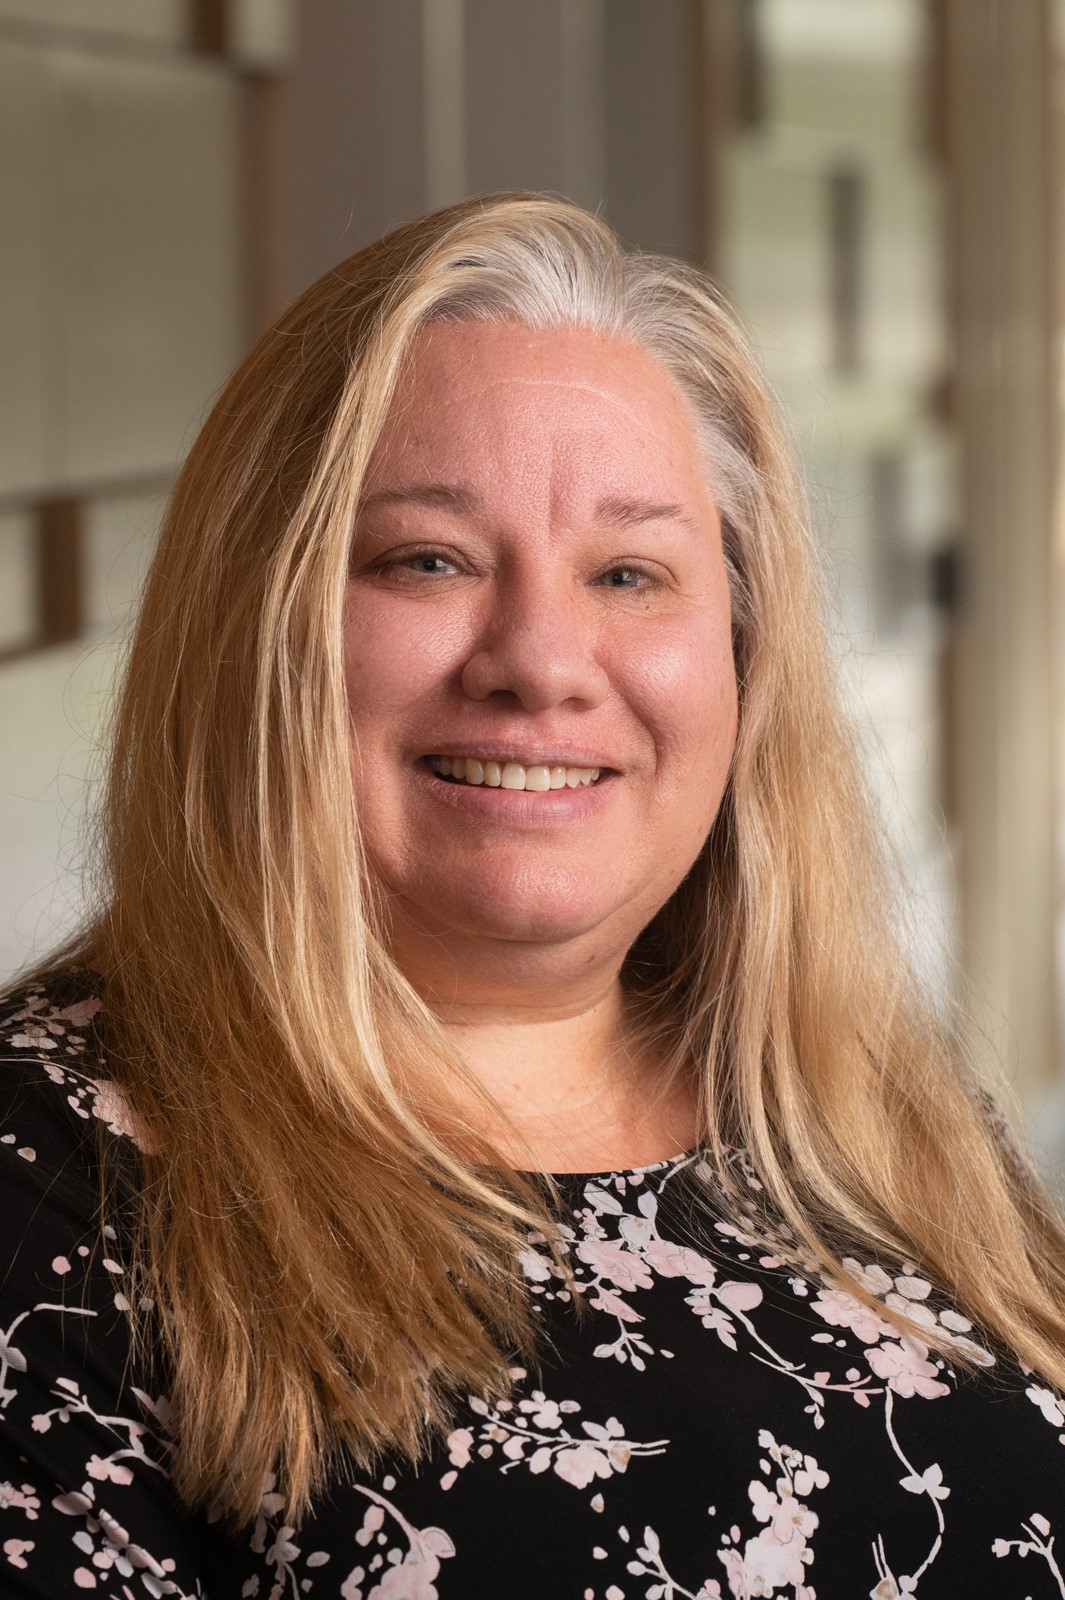 A portrait photo of Jessica A. Ulrich, MSW, LCSW